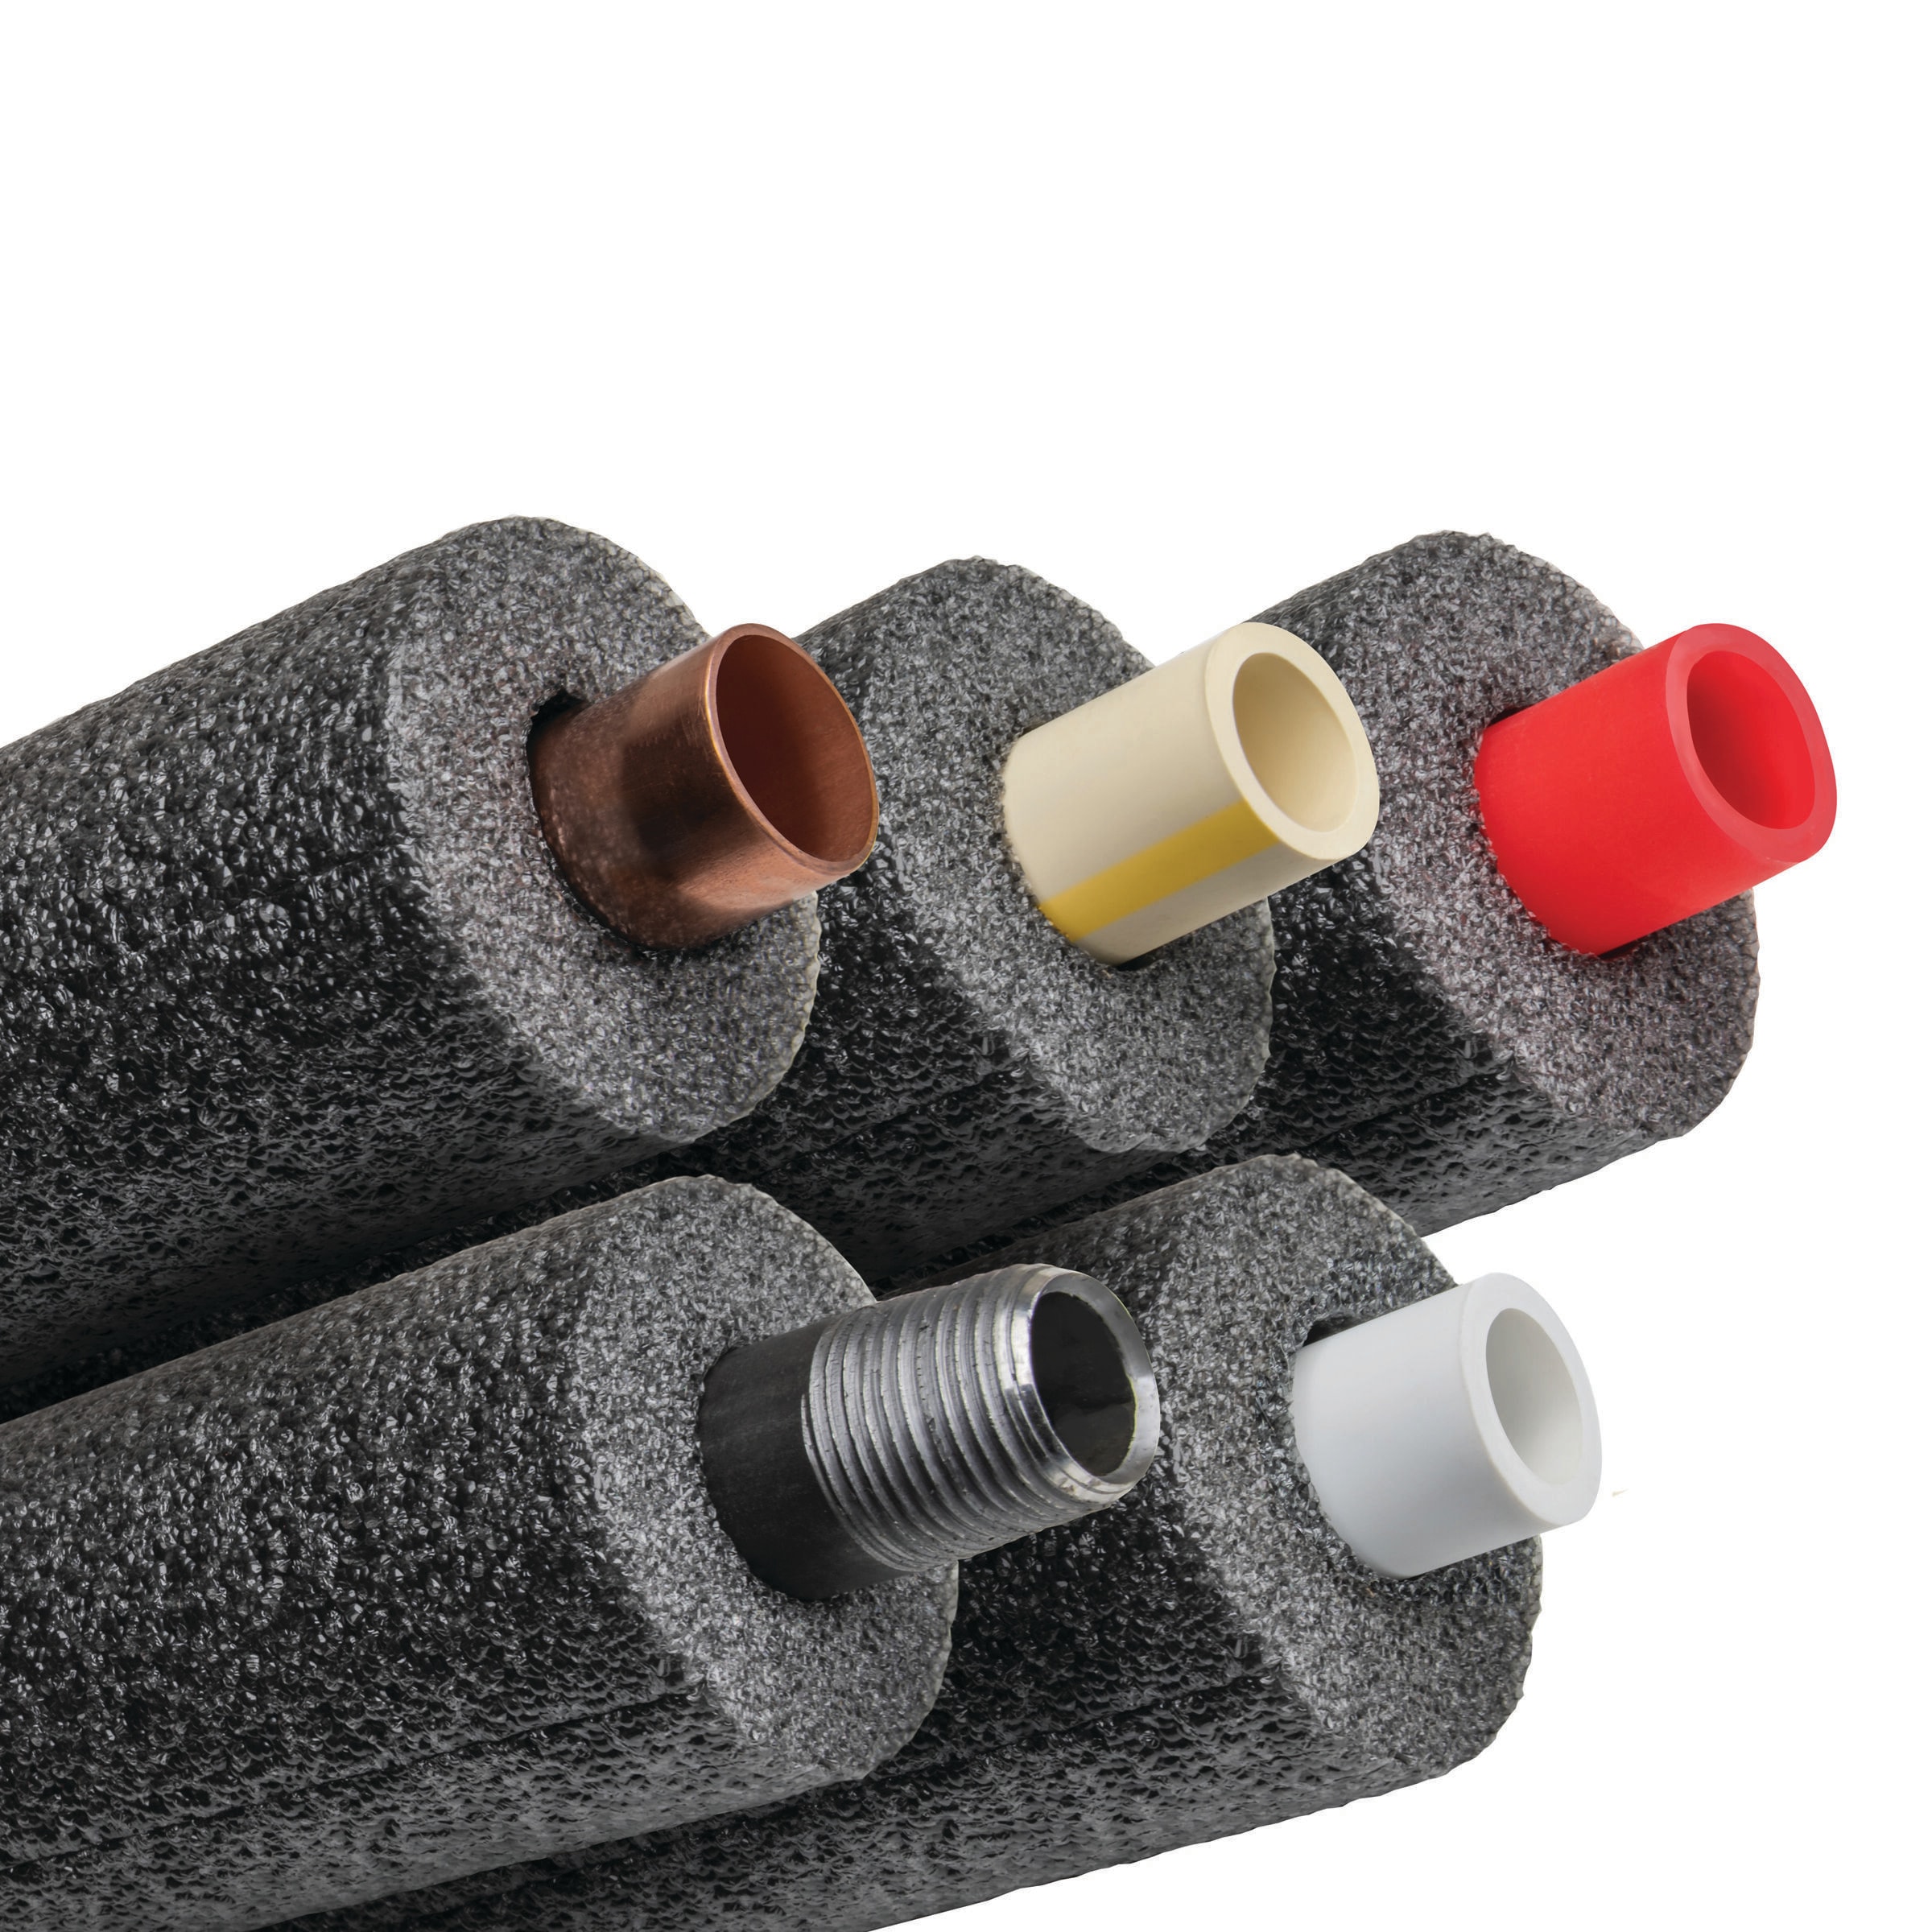 Basic Essentials of Insulation for Pipes